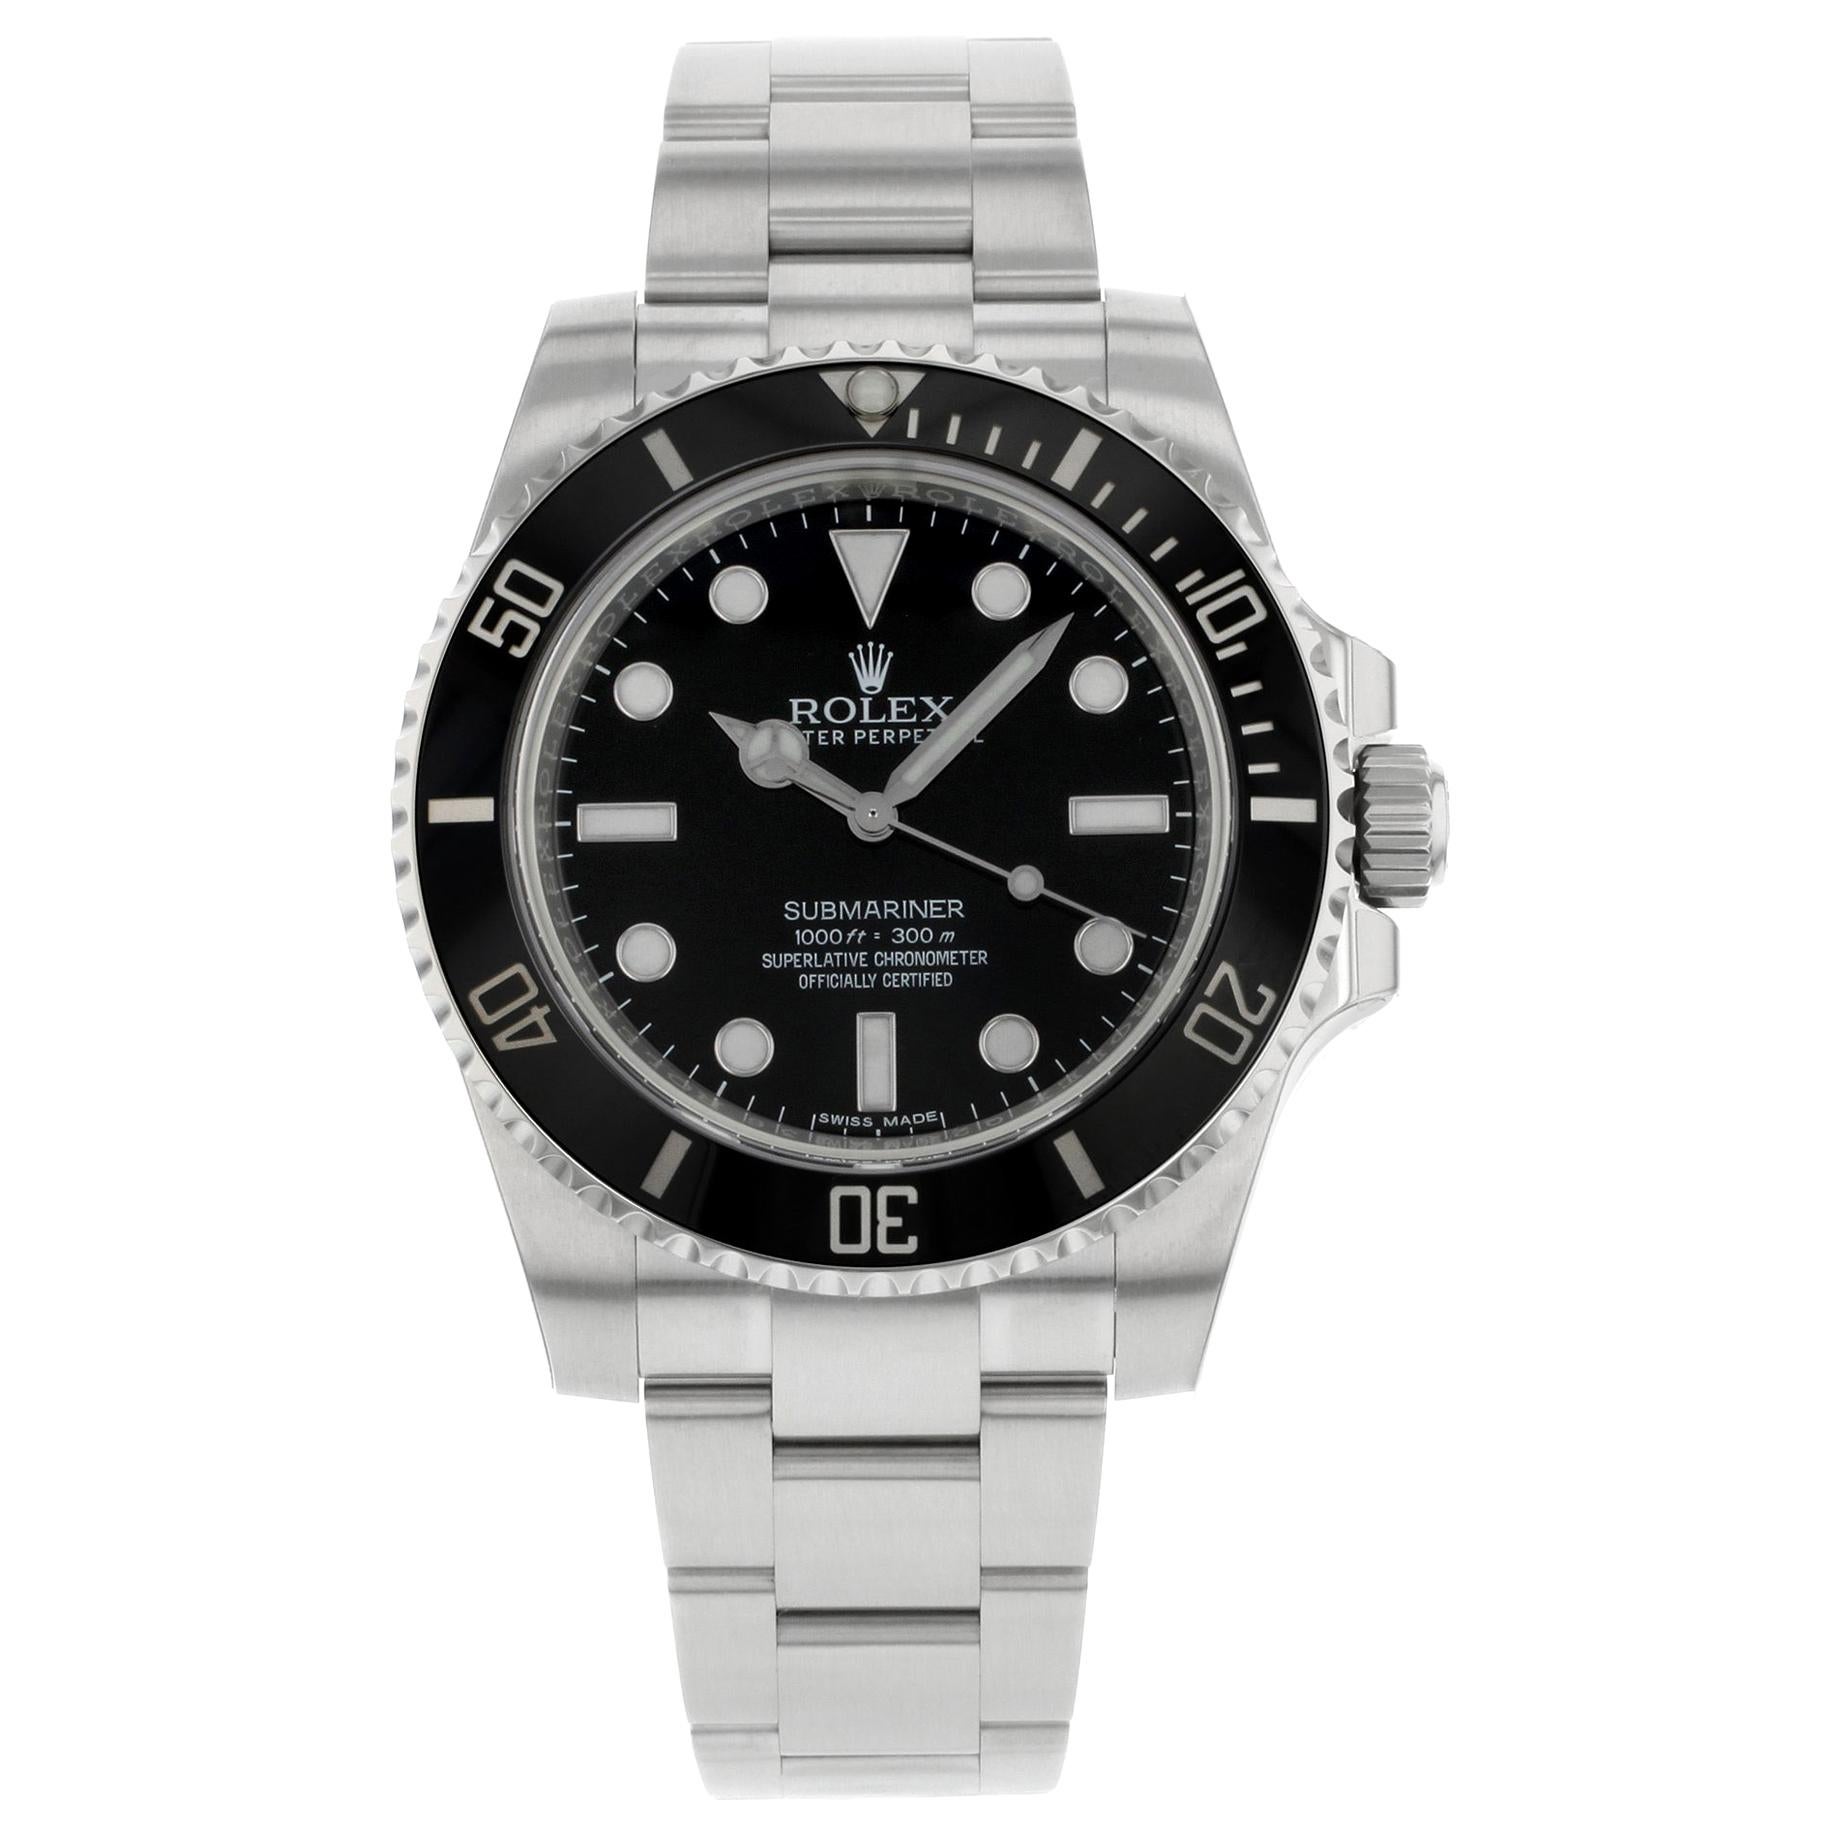 Rolex Submariner No Date Stainless Steel Black Dial Automatic Men's Watch 114060